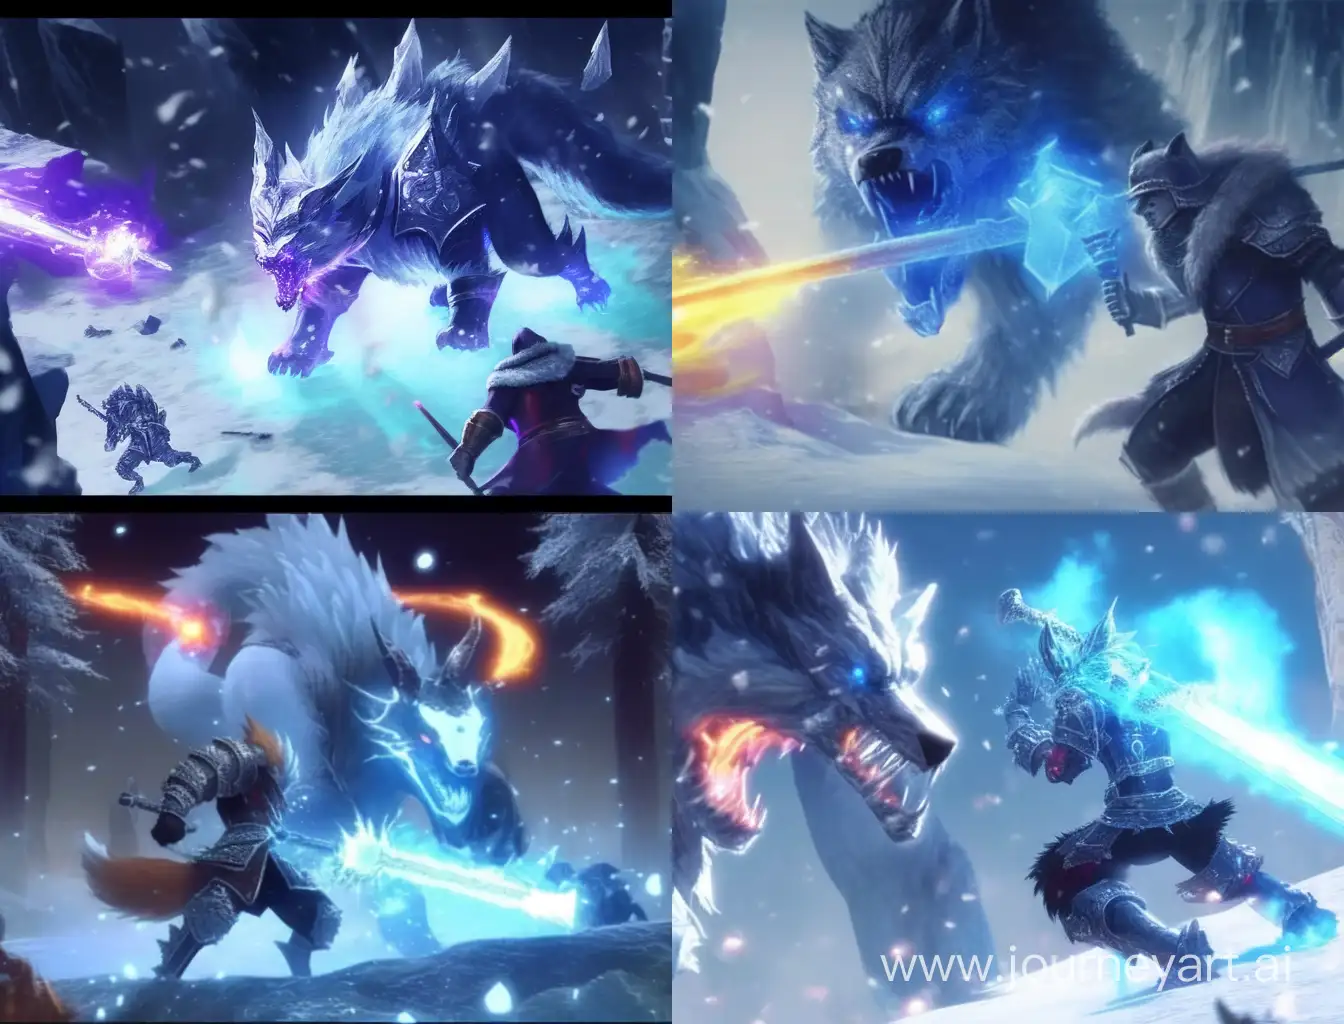 Courageous-Wolf-Knight-Battling-Frost-Monsters-with-Flaming-Sword